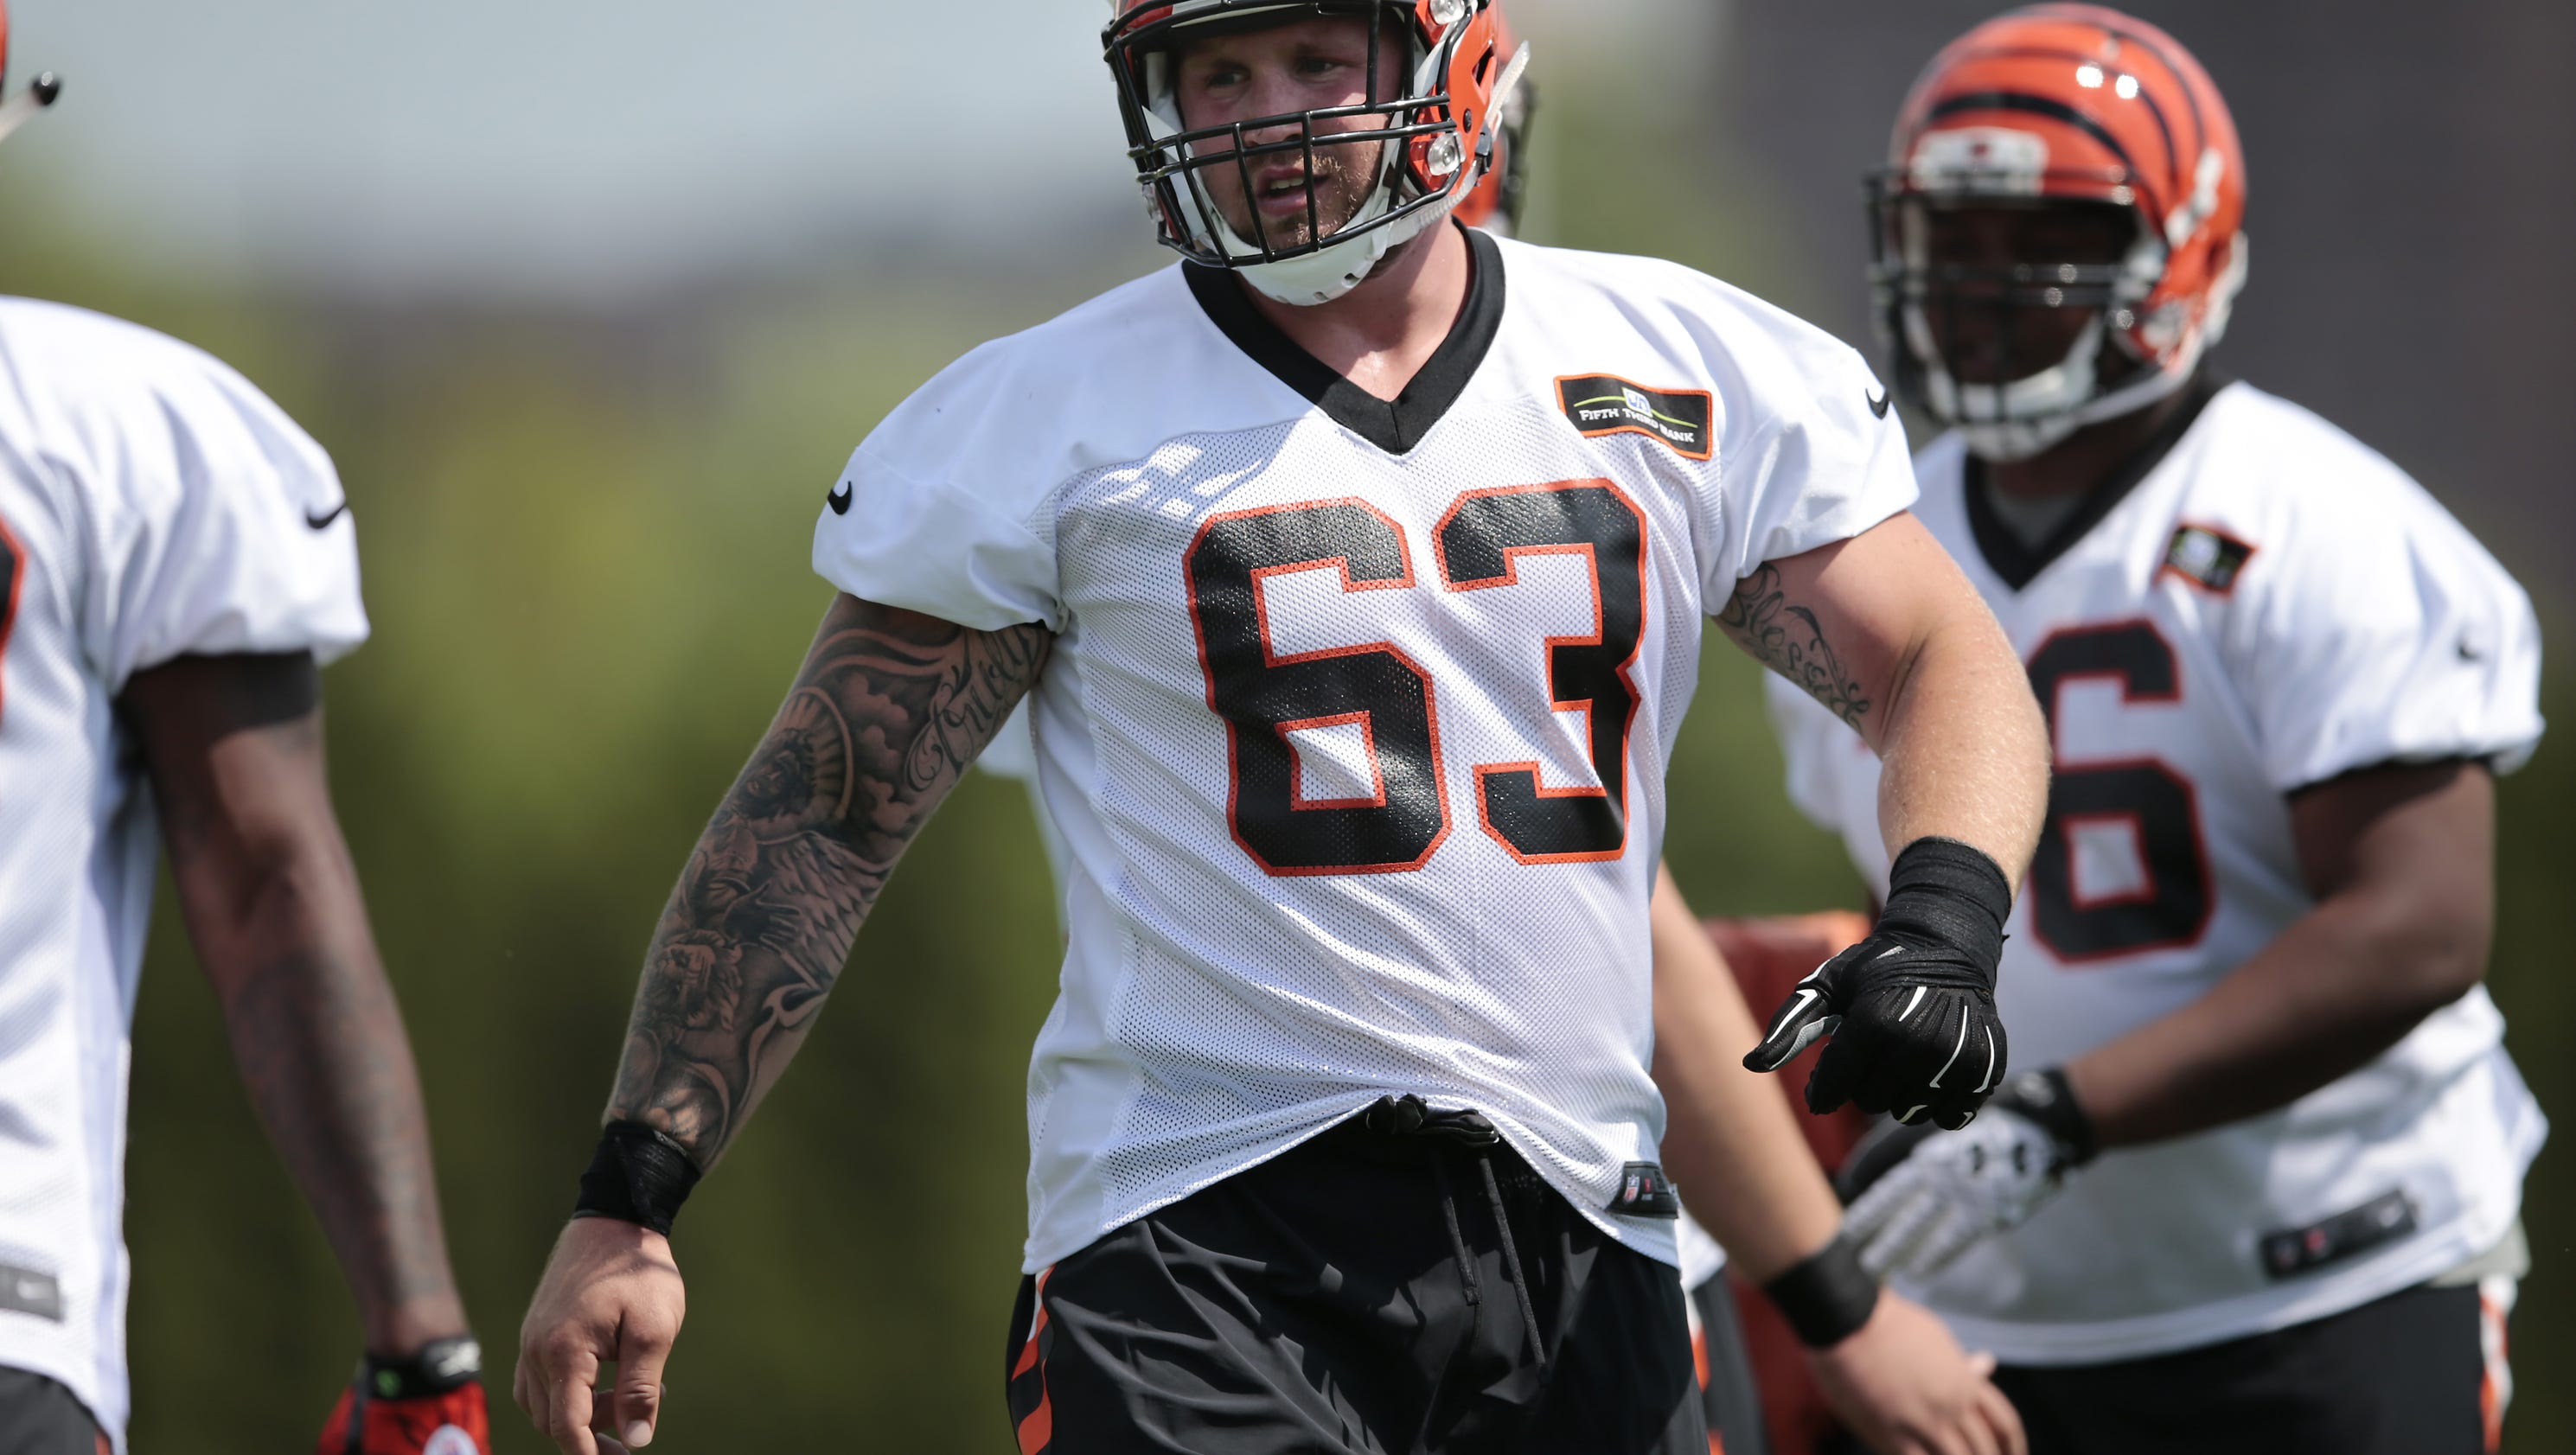 Bengals-Lions live updates: Christian Westerman to start; Andrew Billings, Cody Core inactive